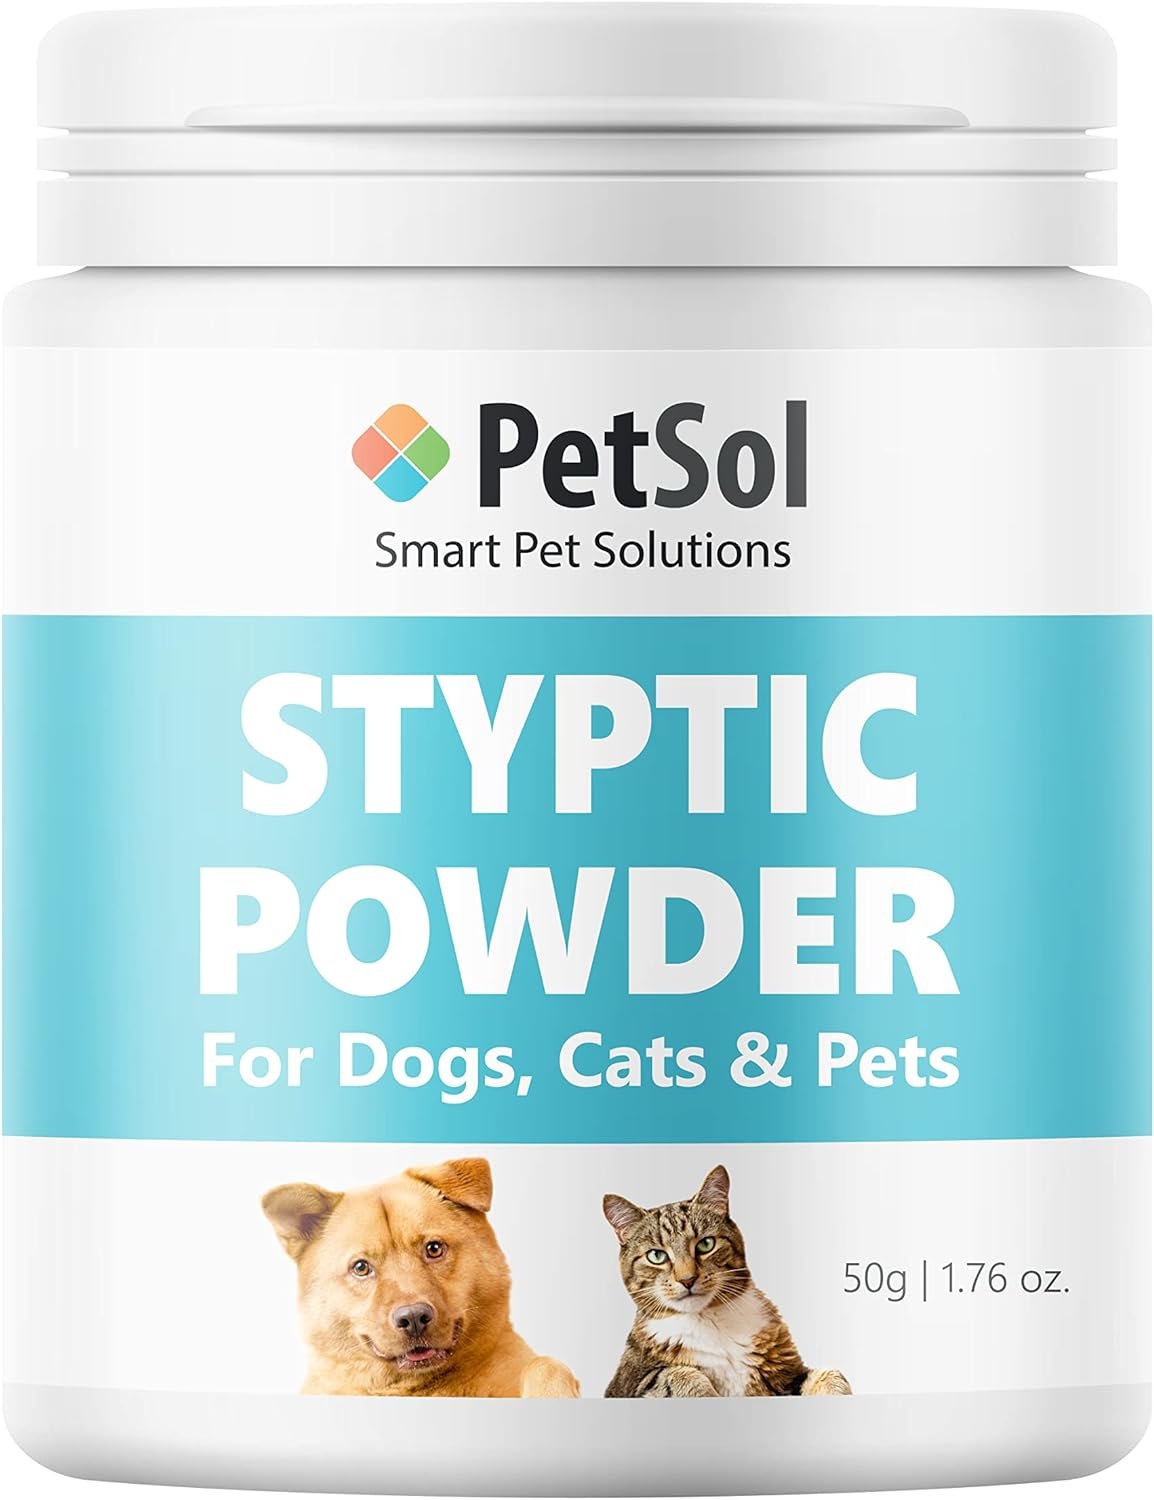 petsol styptic powder for pets large 50g tub stops bleeding fast in dogs cats birds rabbits pets safe treatment for cuts 1